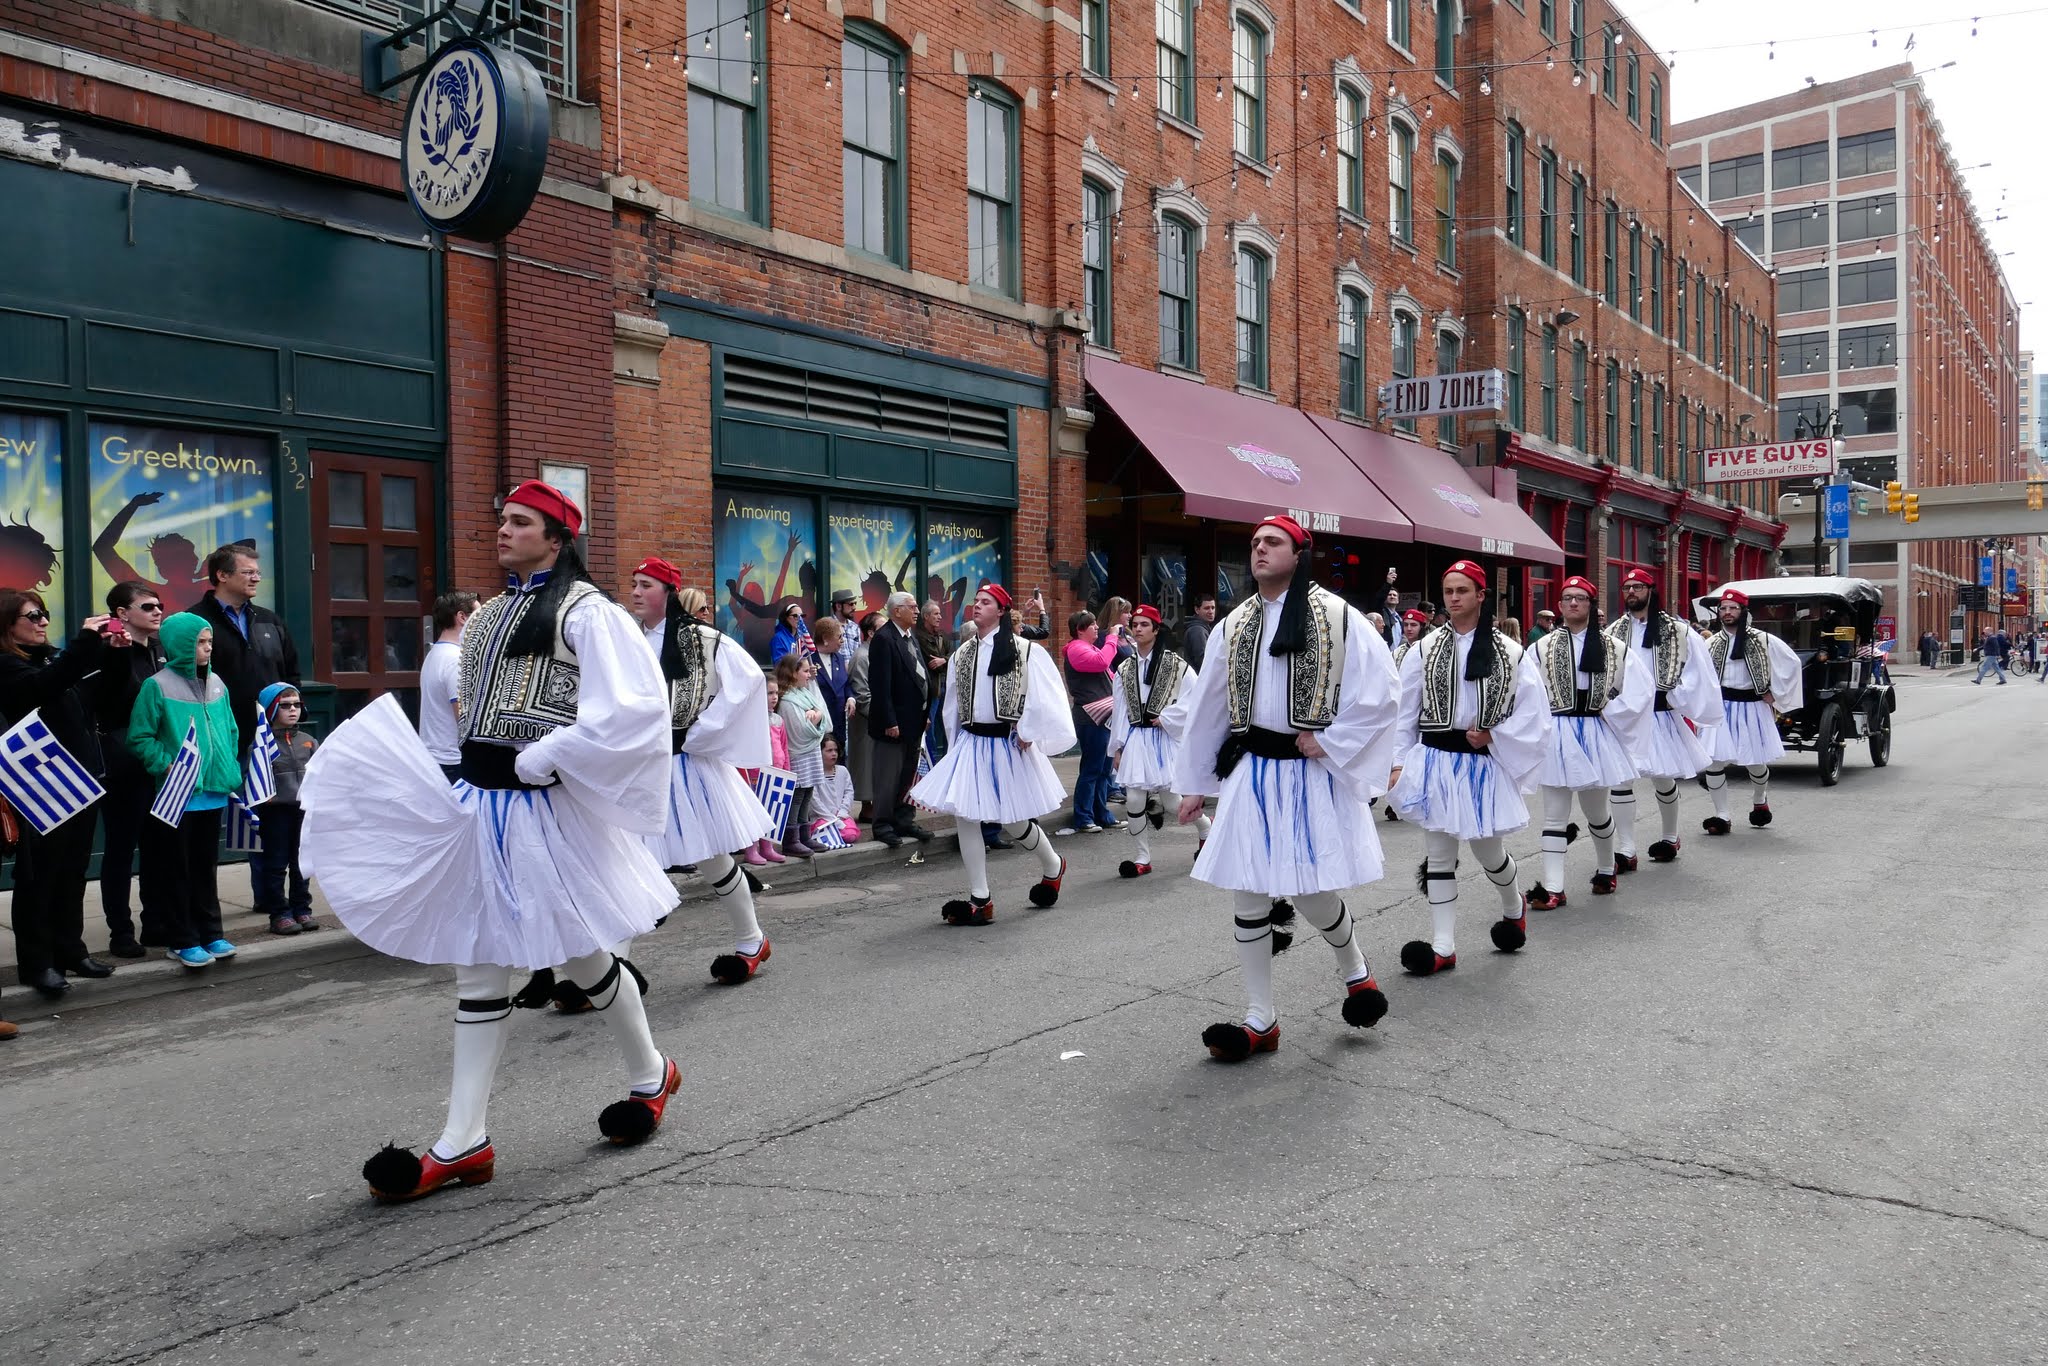 The 17th Annual Detroit Greek Independence Day Parade Kicks Off in